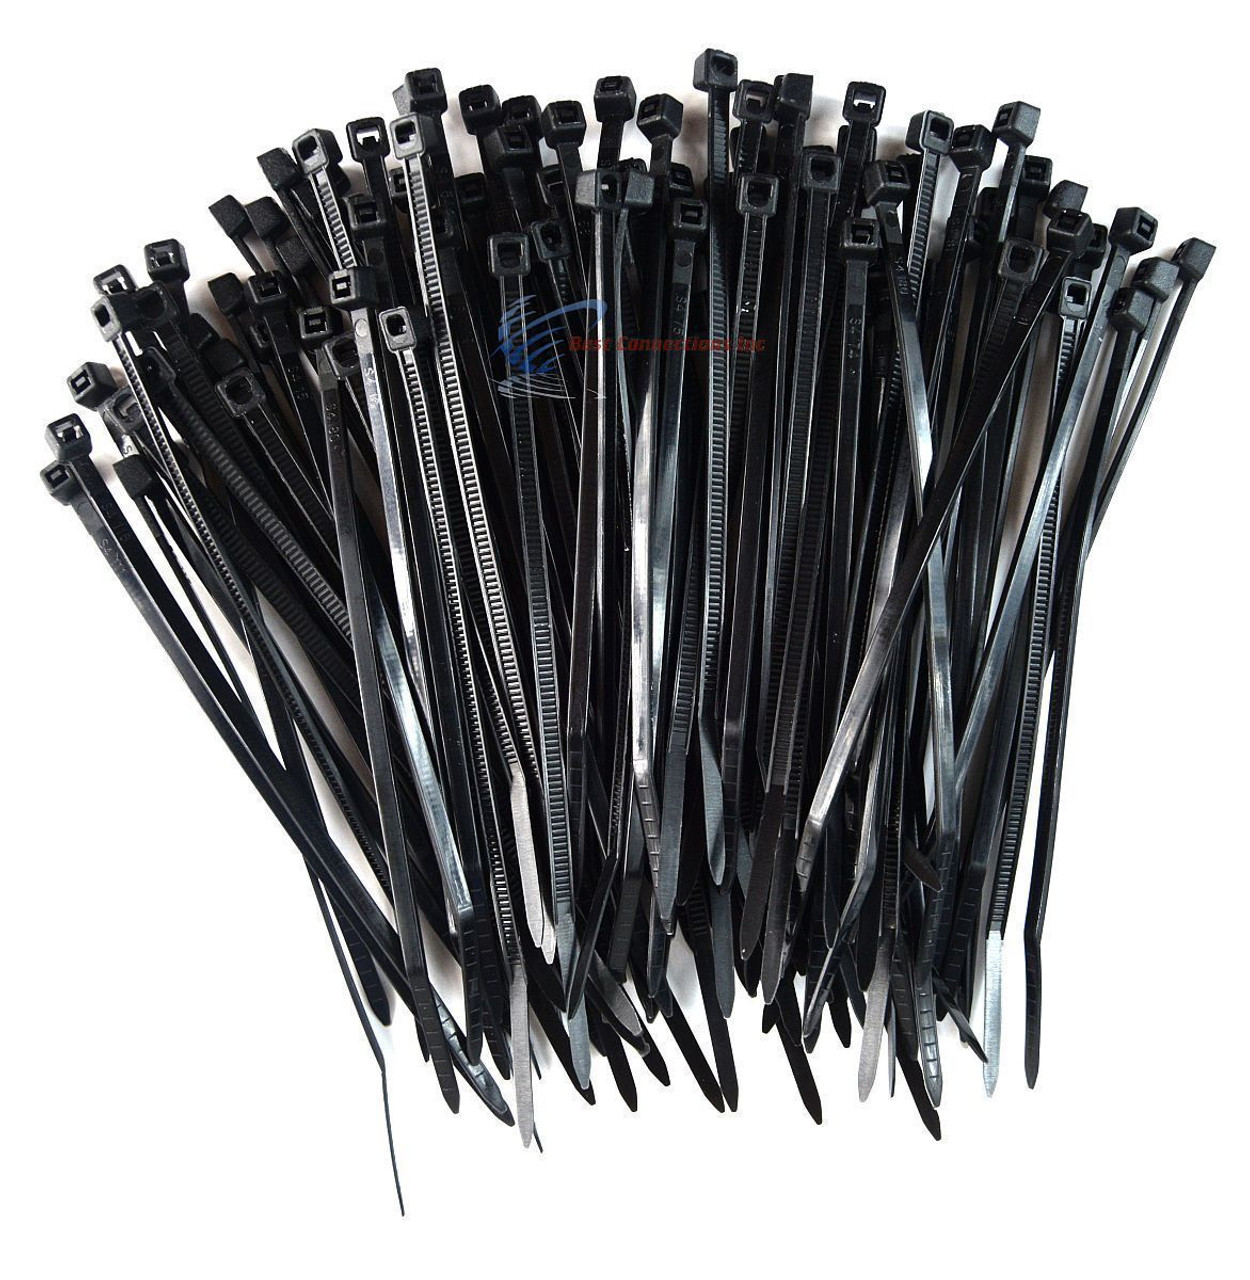 50 Bags of 100 5000 Pcs 4" Inch Nylon Black Cable Zip Ties Wire Straps 